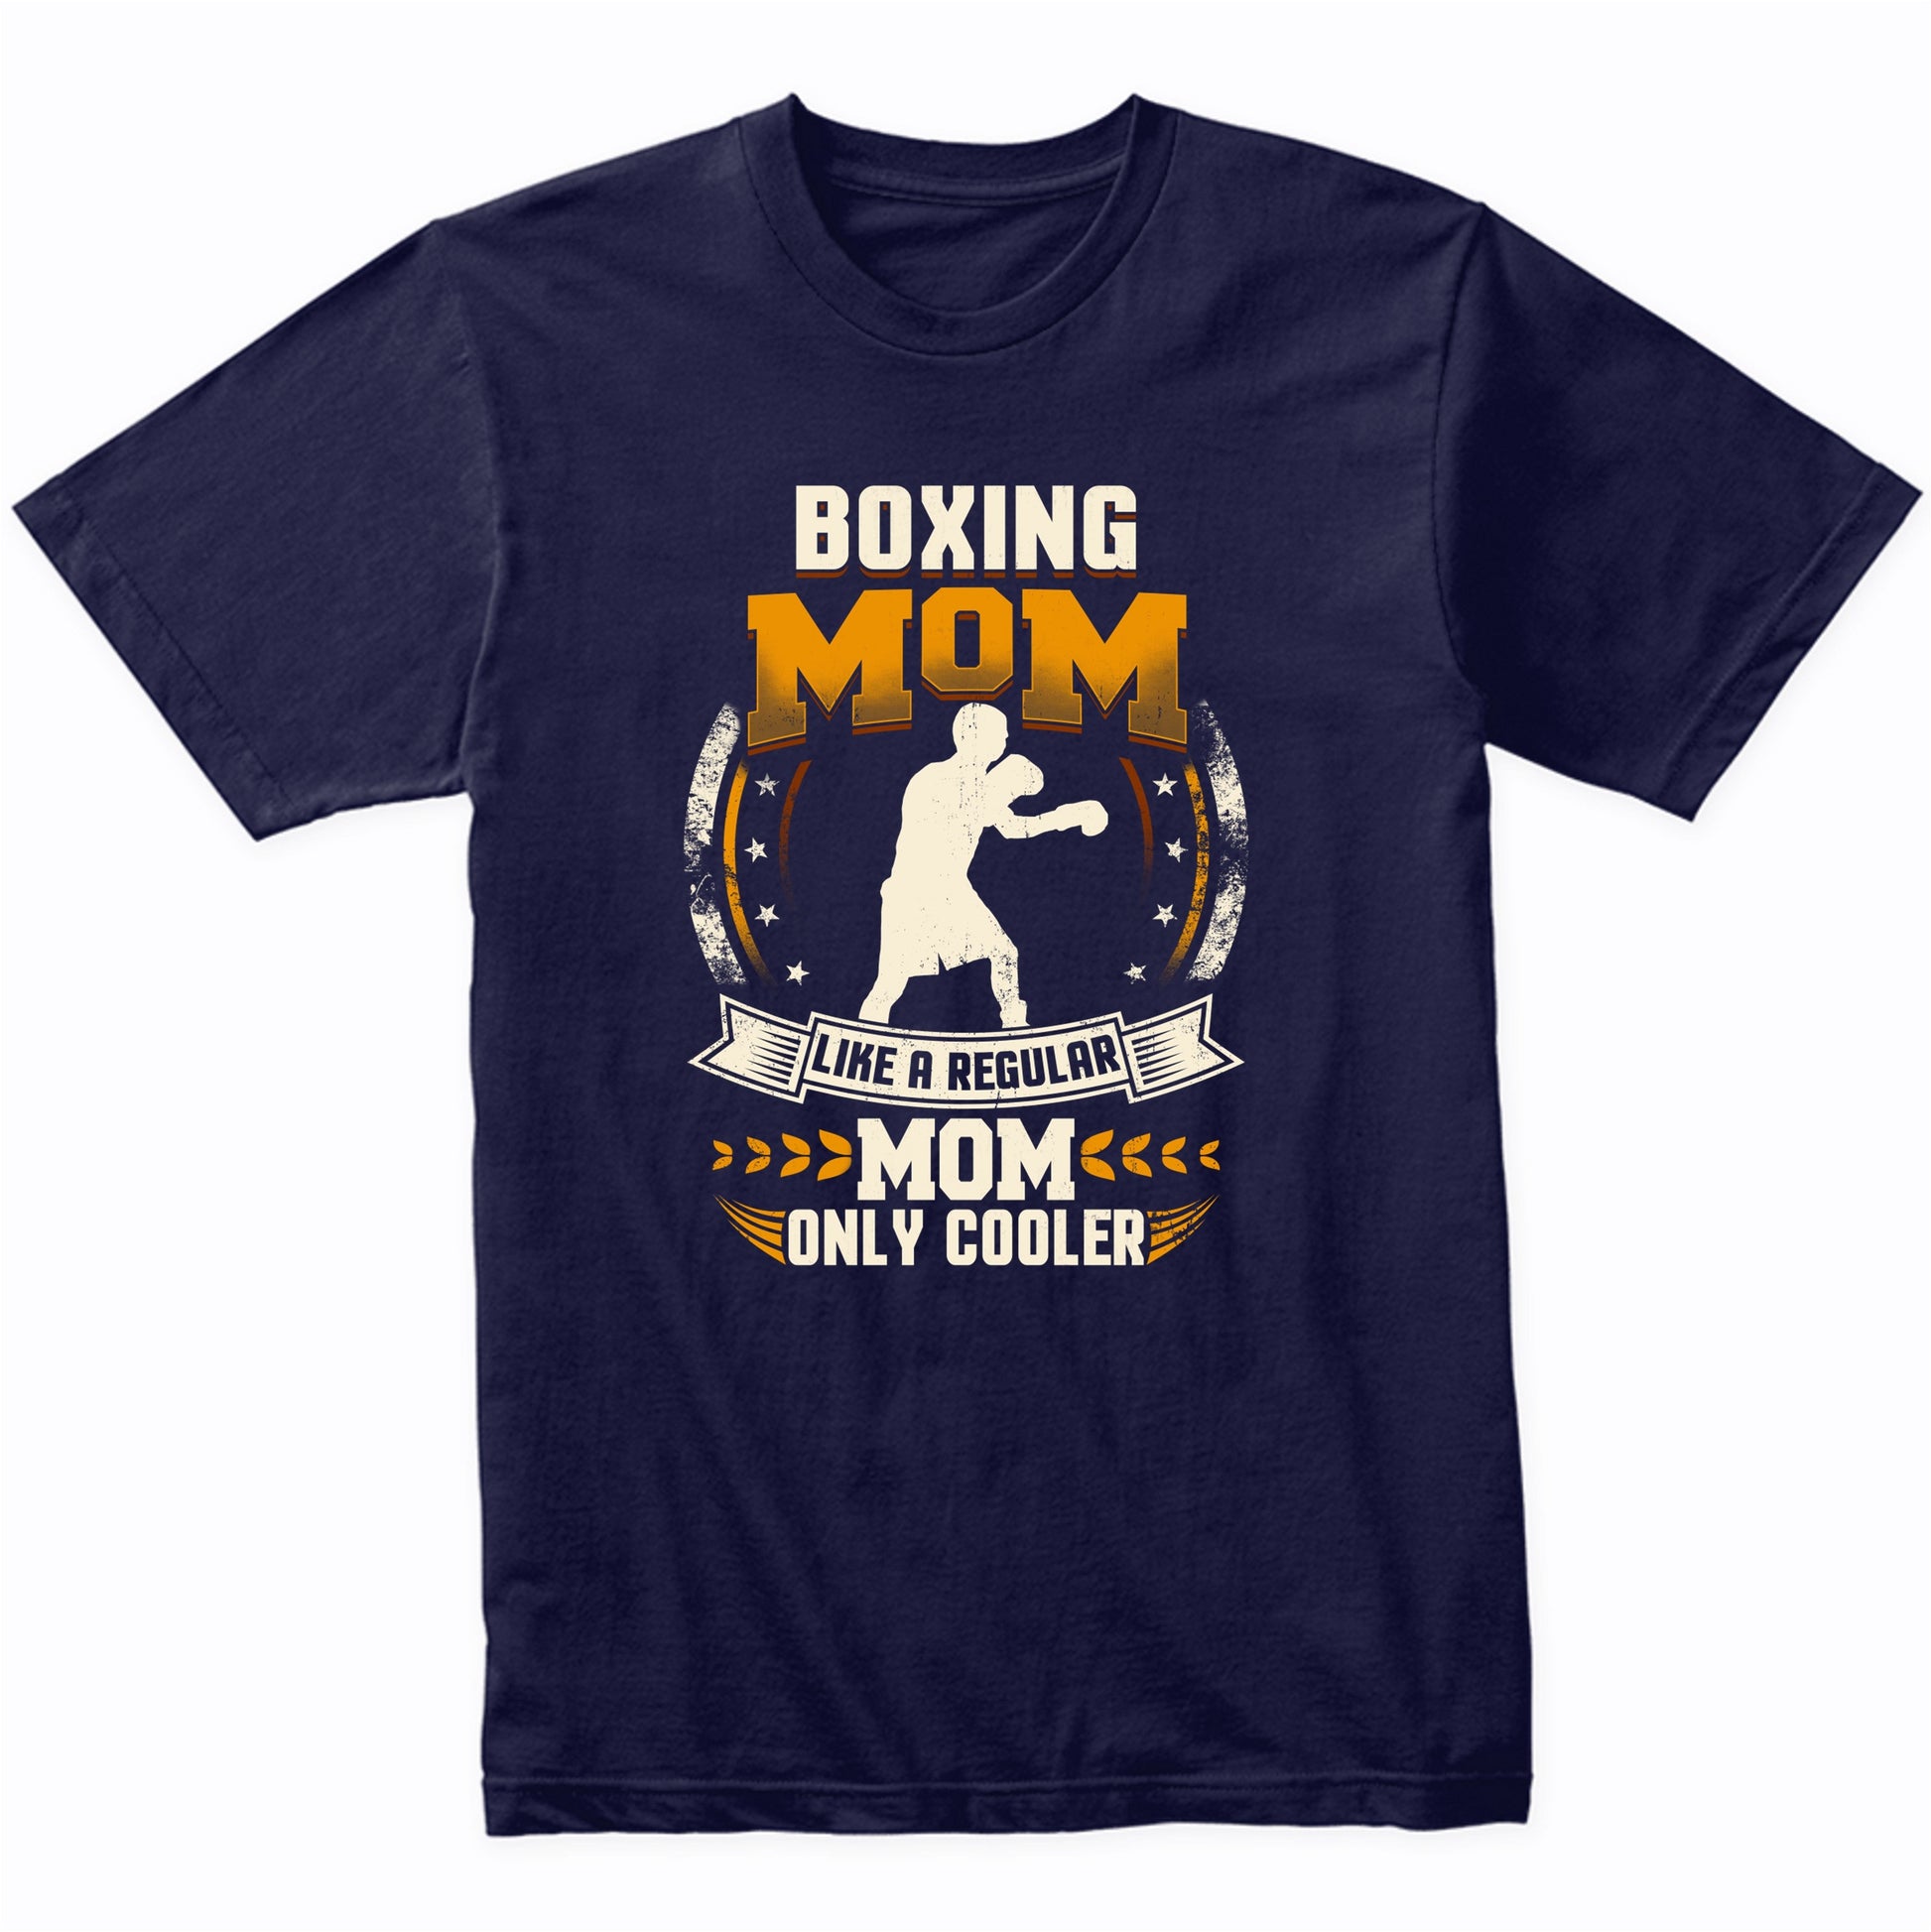 Boxing Mom Like A Regular Mom Only Cooler Funny T-Shirt